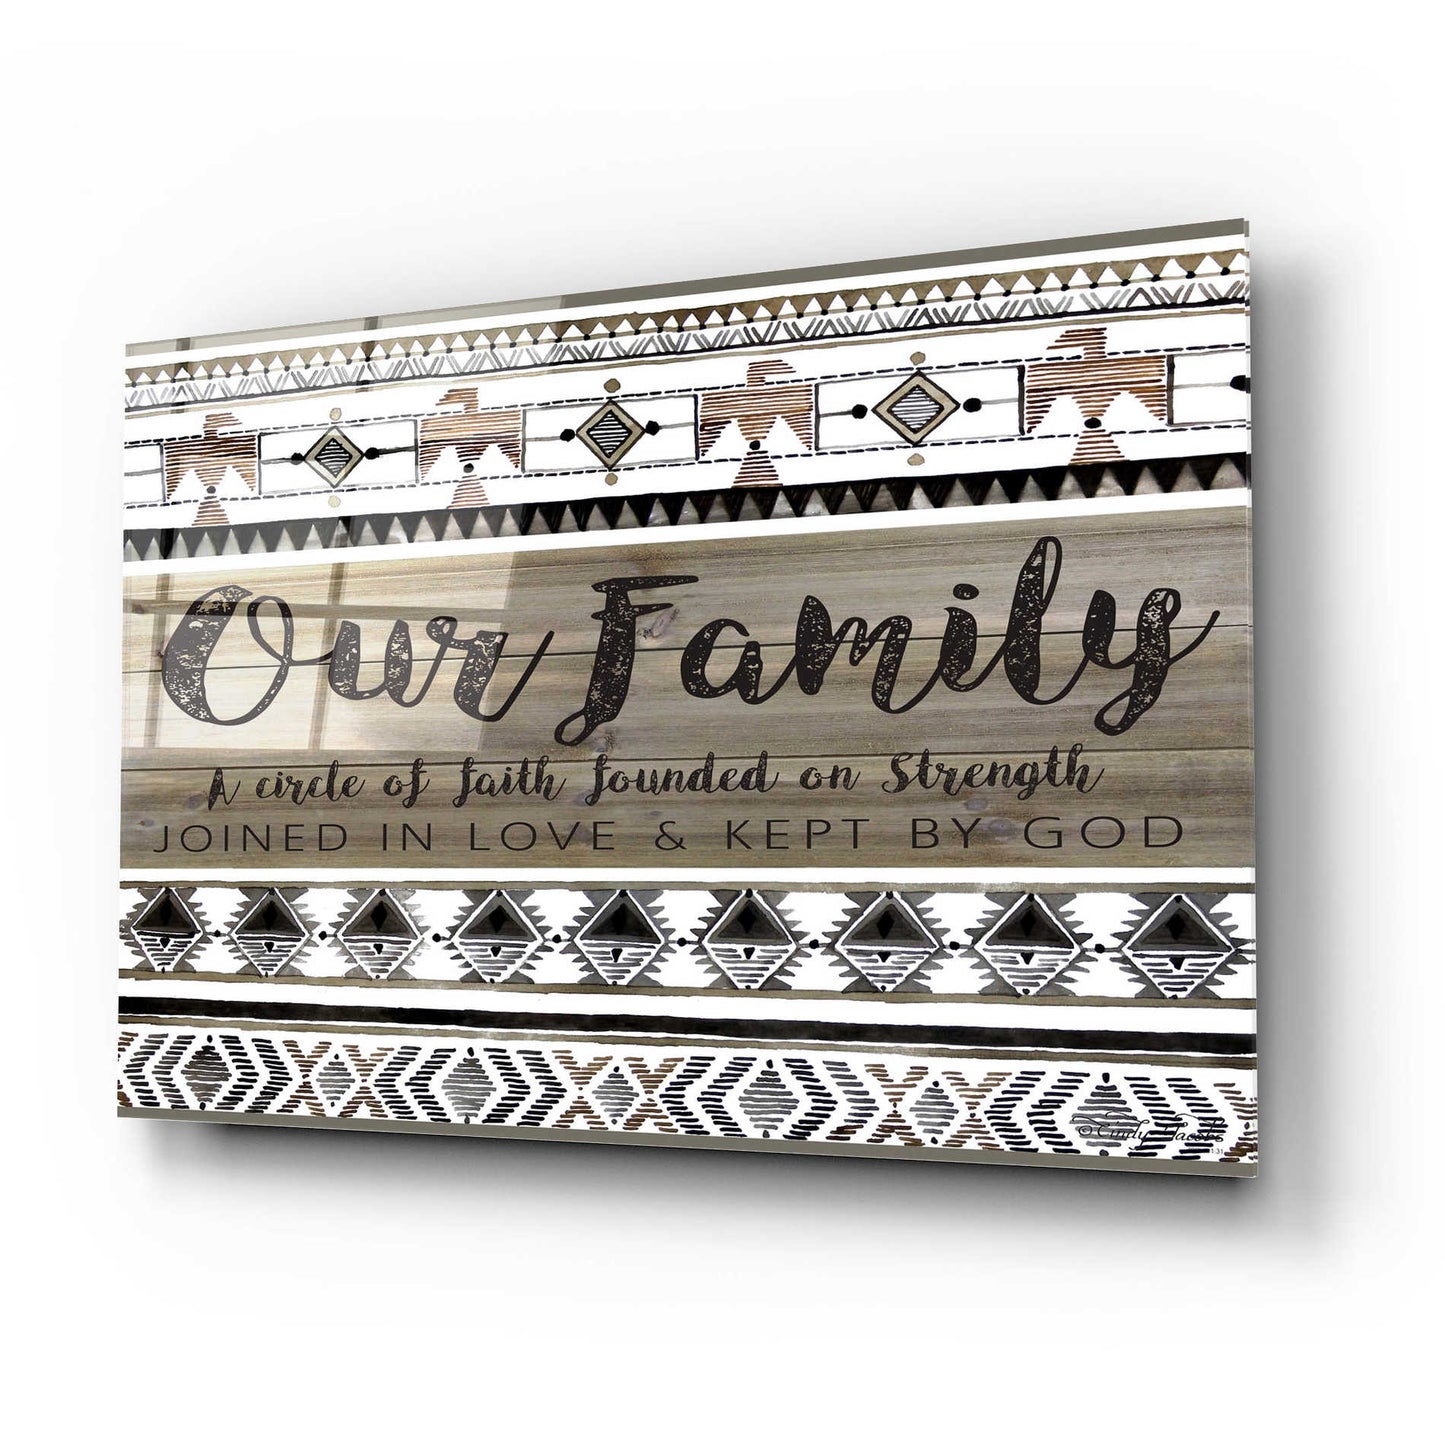 Epic Art 'Our Family' by Cindy Jacobs, Acrylic Glass Wall Art,24x16